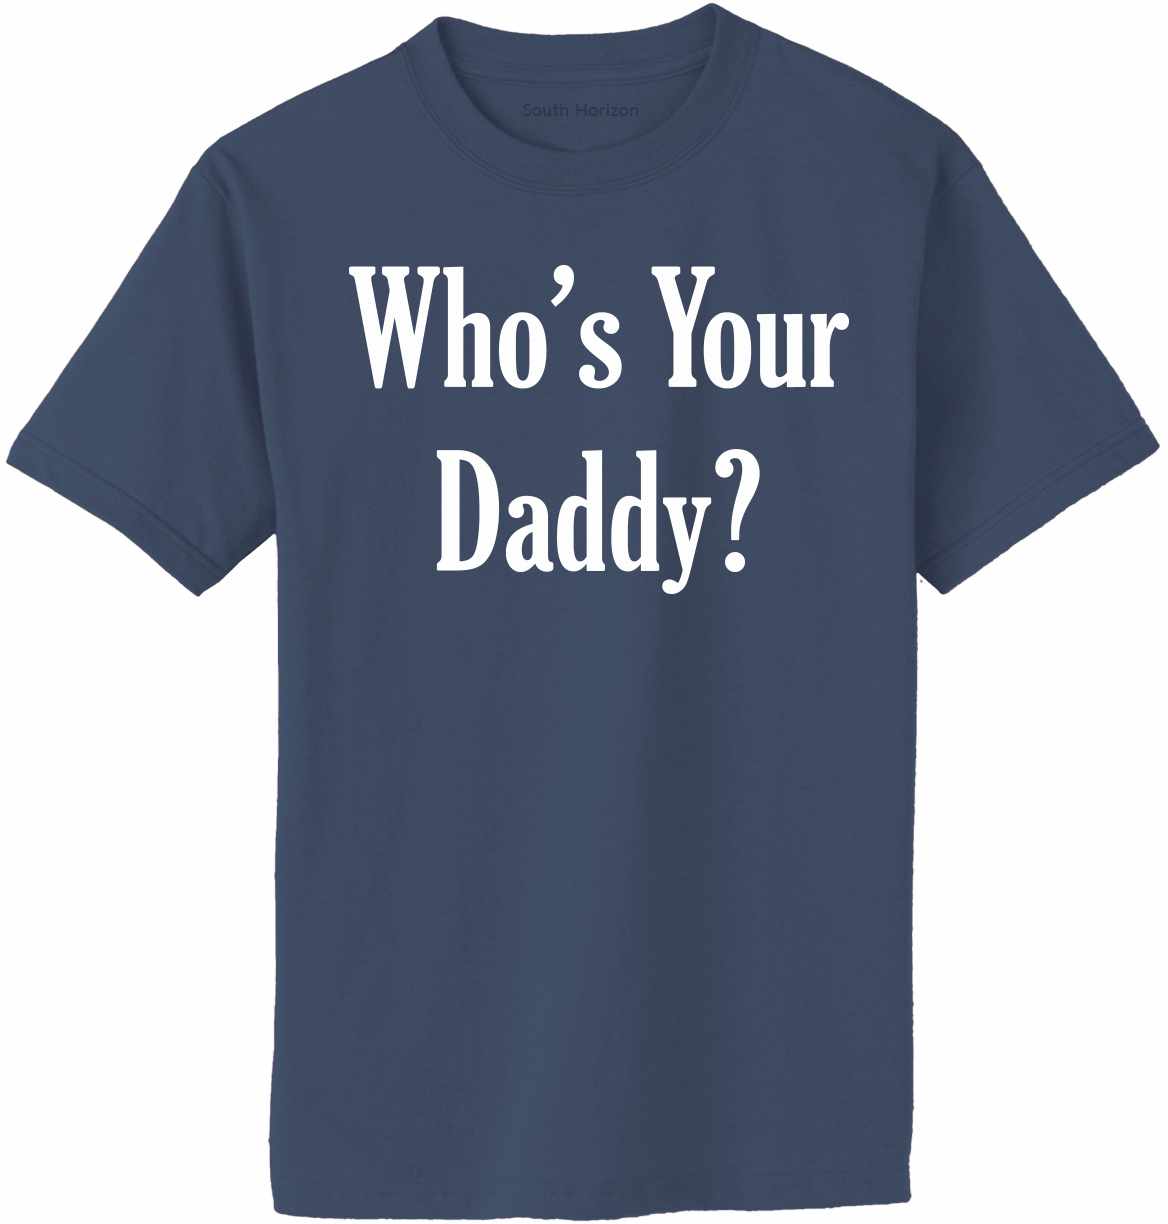 Who's Your Daddy Adult T-Shirt (#584-1)